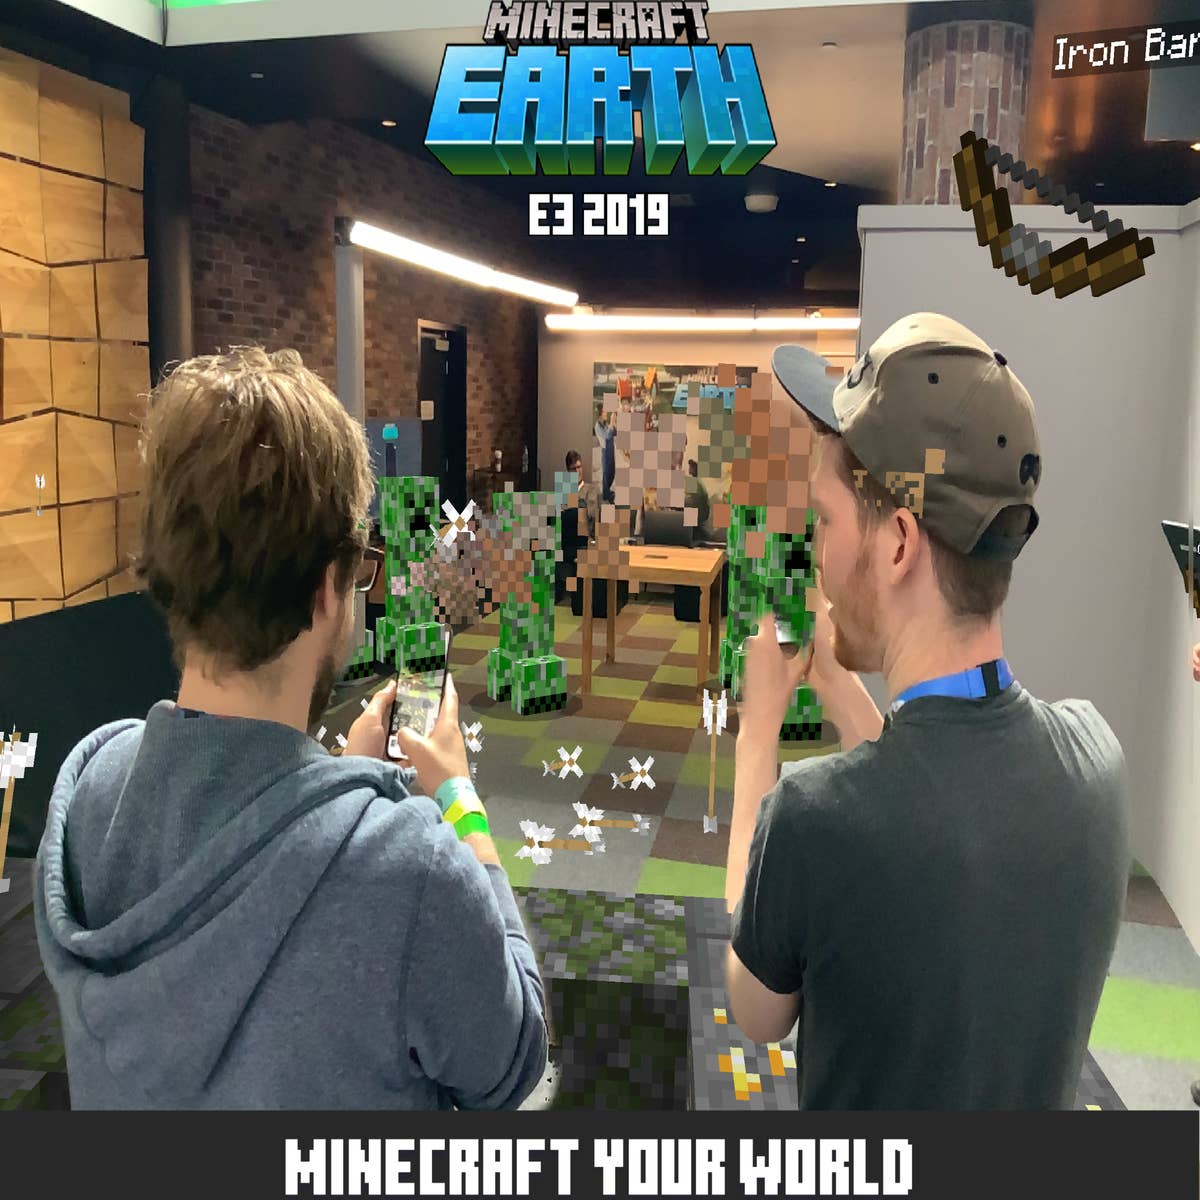 Explore the Best Minecraftearth Art